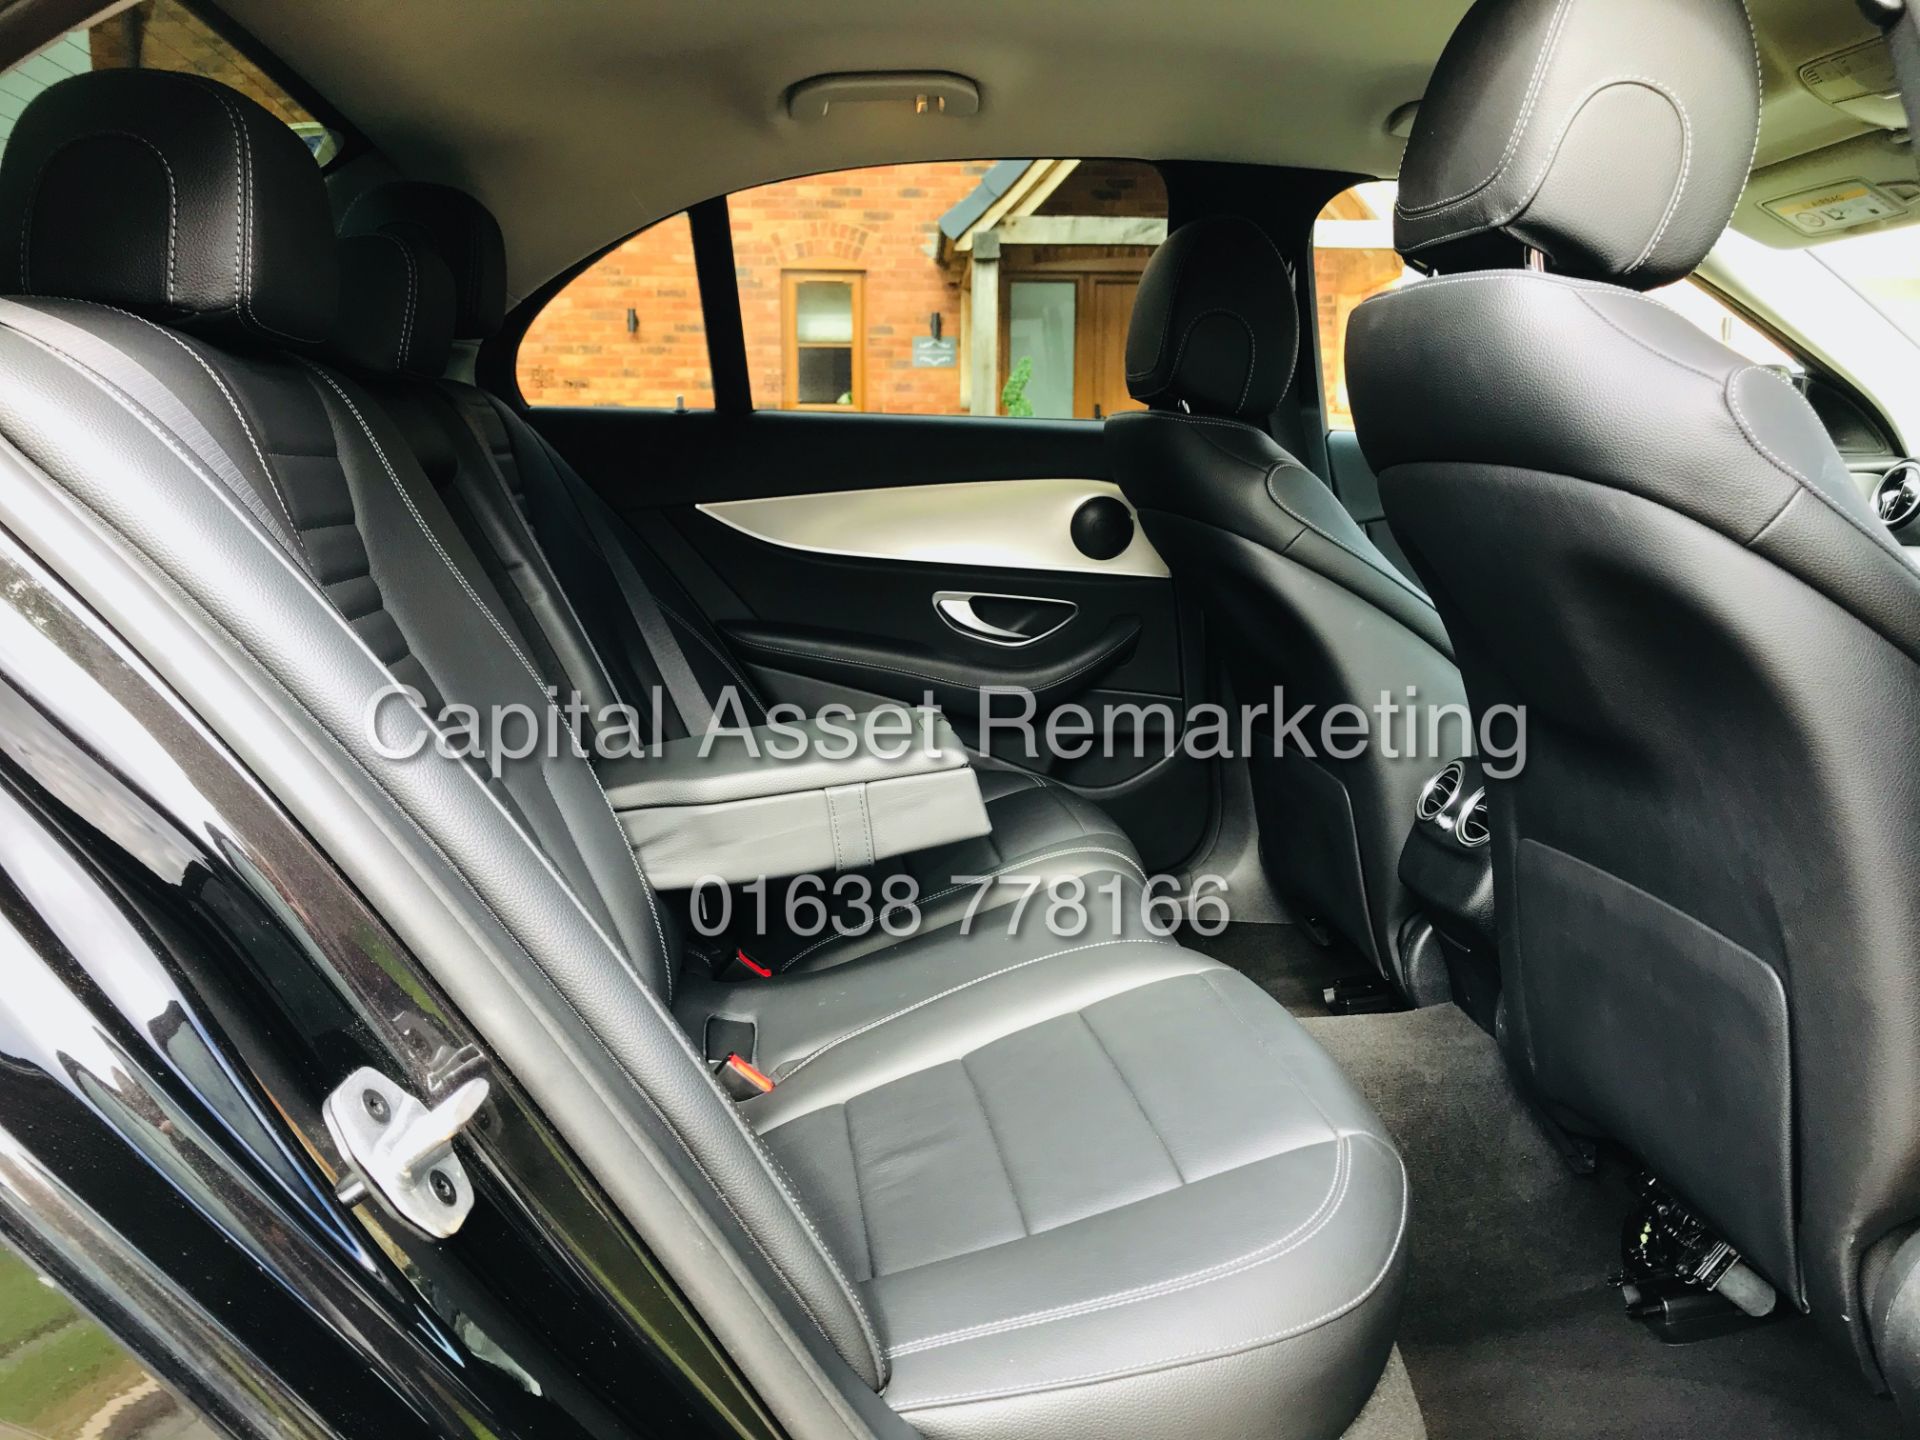 (On Sale) MERCEDES E220d "SPECIAL EQUIPMENT" AUTO (2019) 1 OWNER *GREAT SPEC* TAKE A PEEK - Image 34 of 35